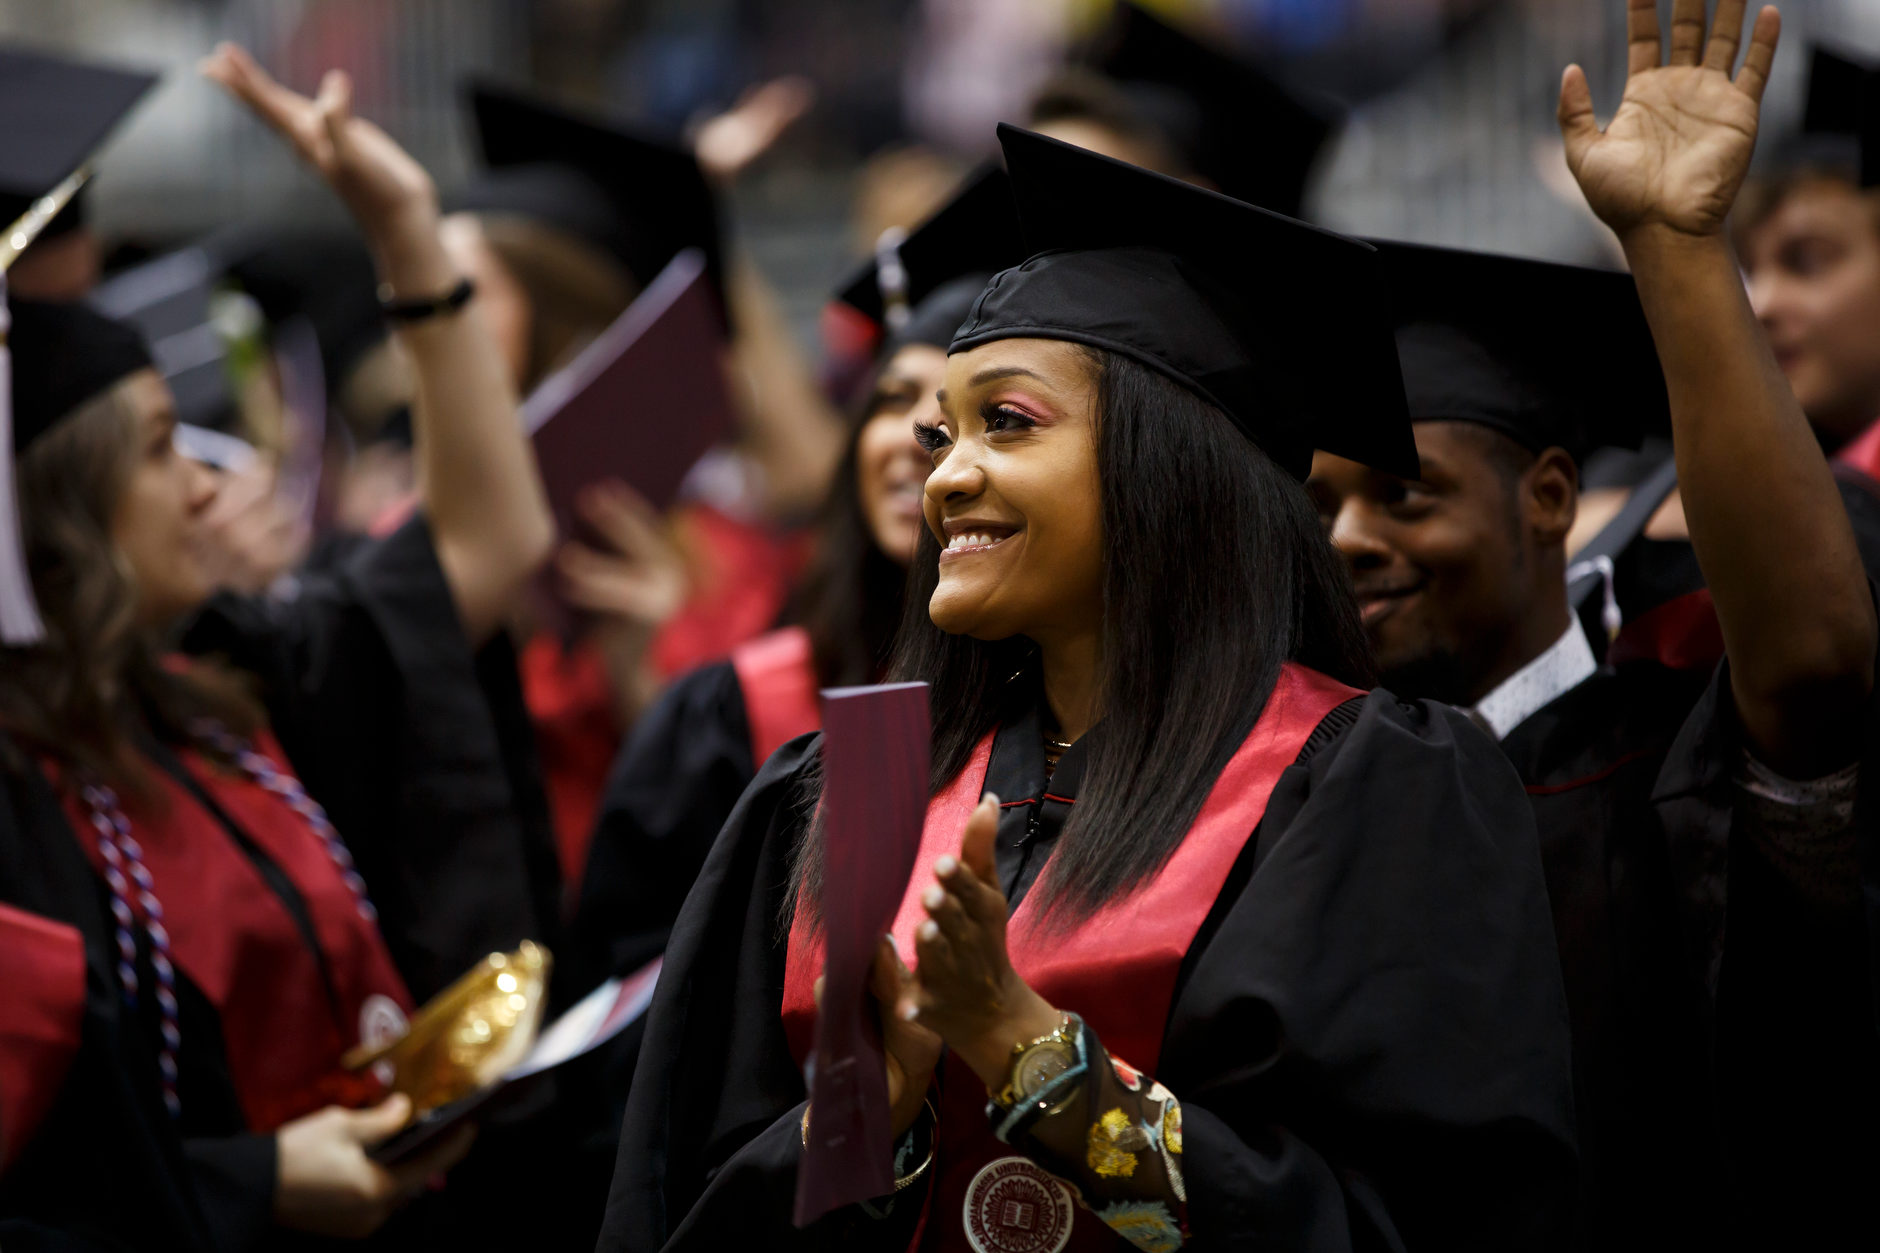 A graduate applauds her family in the audience during the IU Northwest Commencement at the Genesis Convention Center on Thursday, May 9, 2019. (James Brosher/Indiana University)